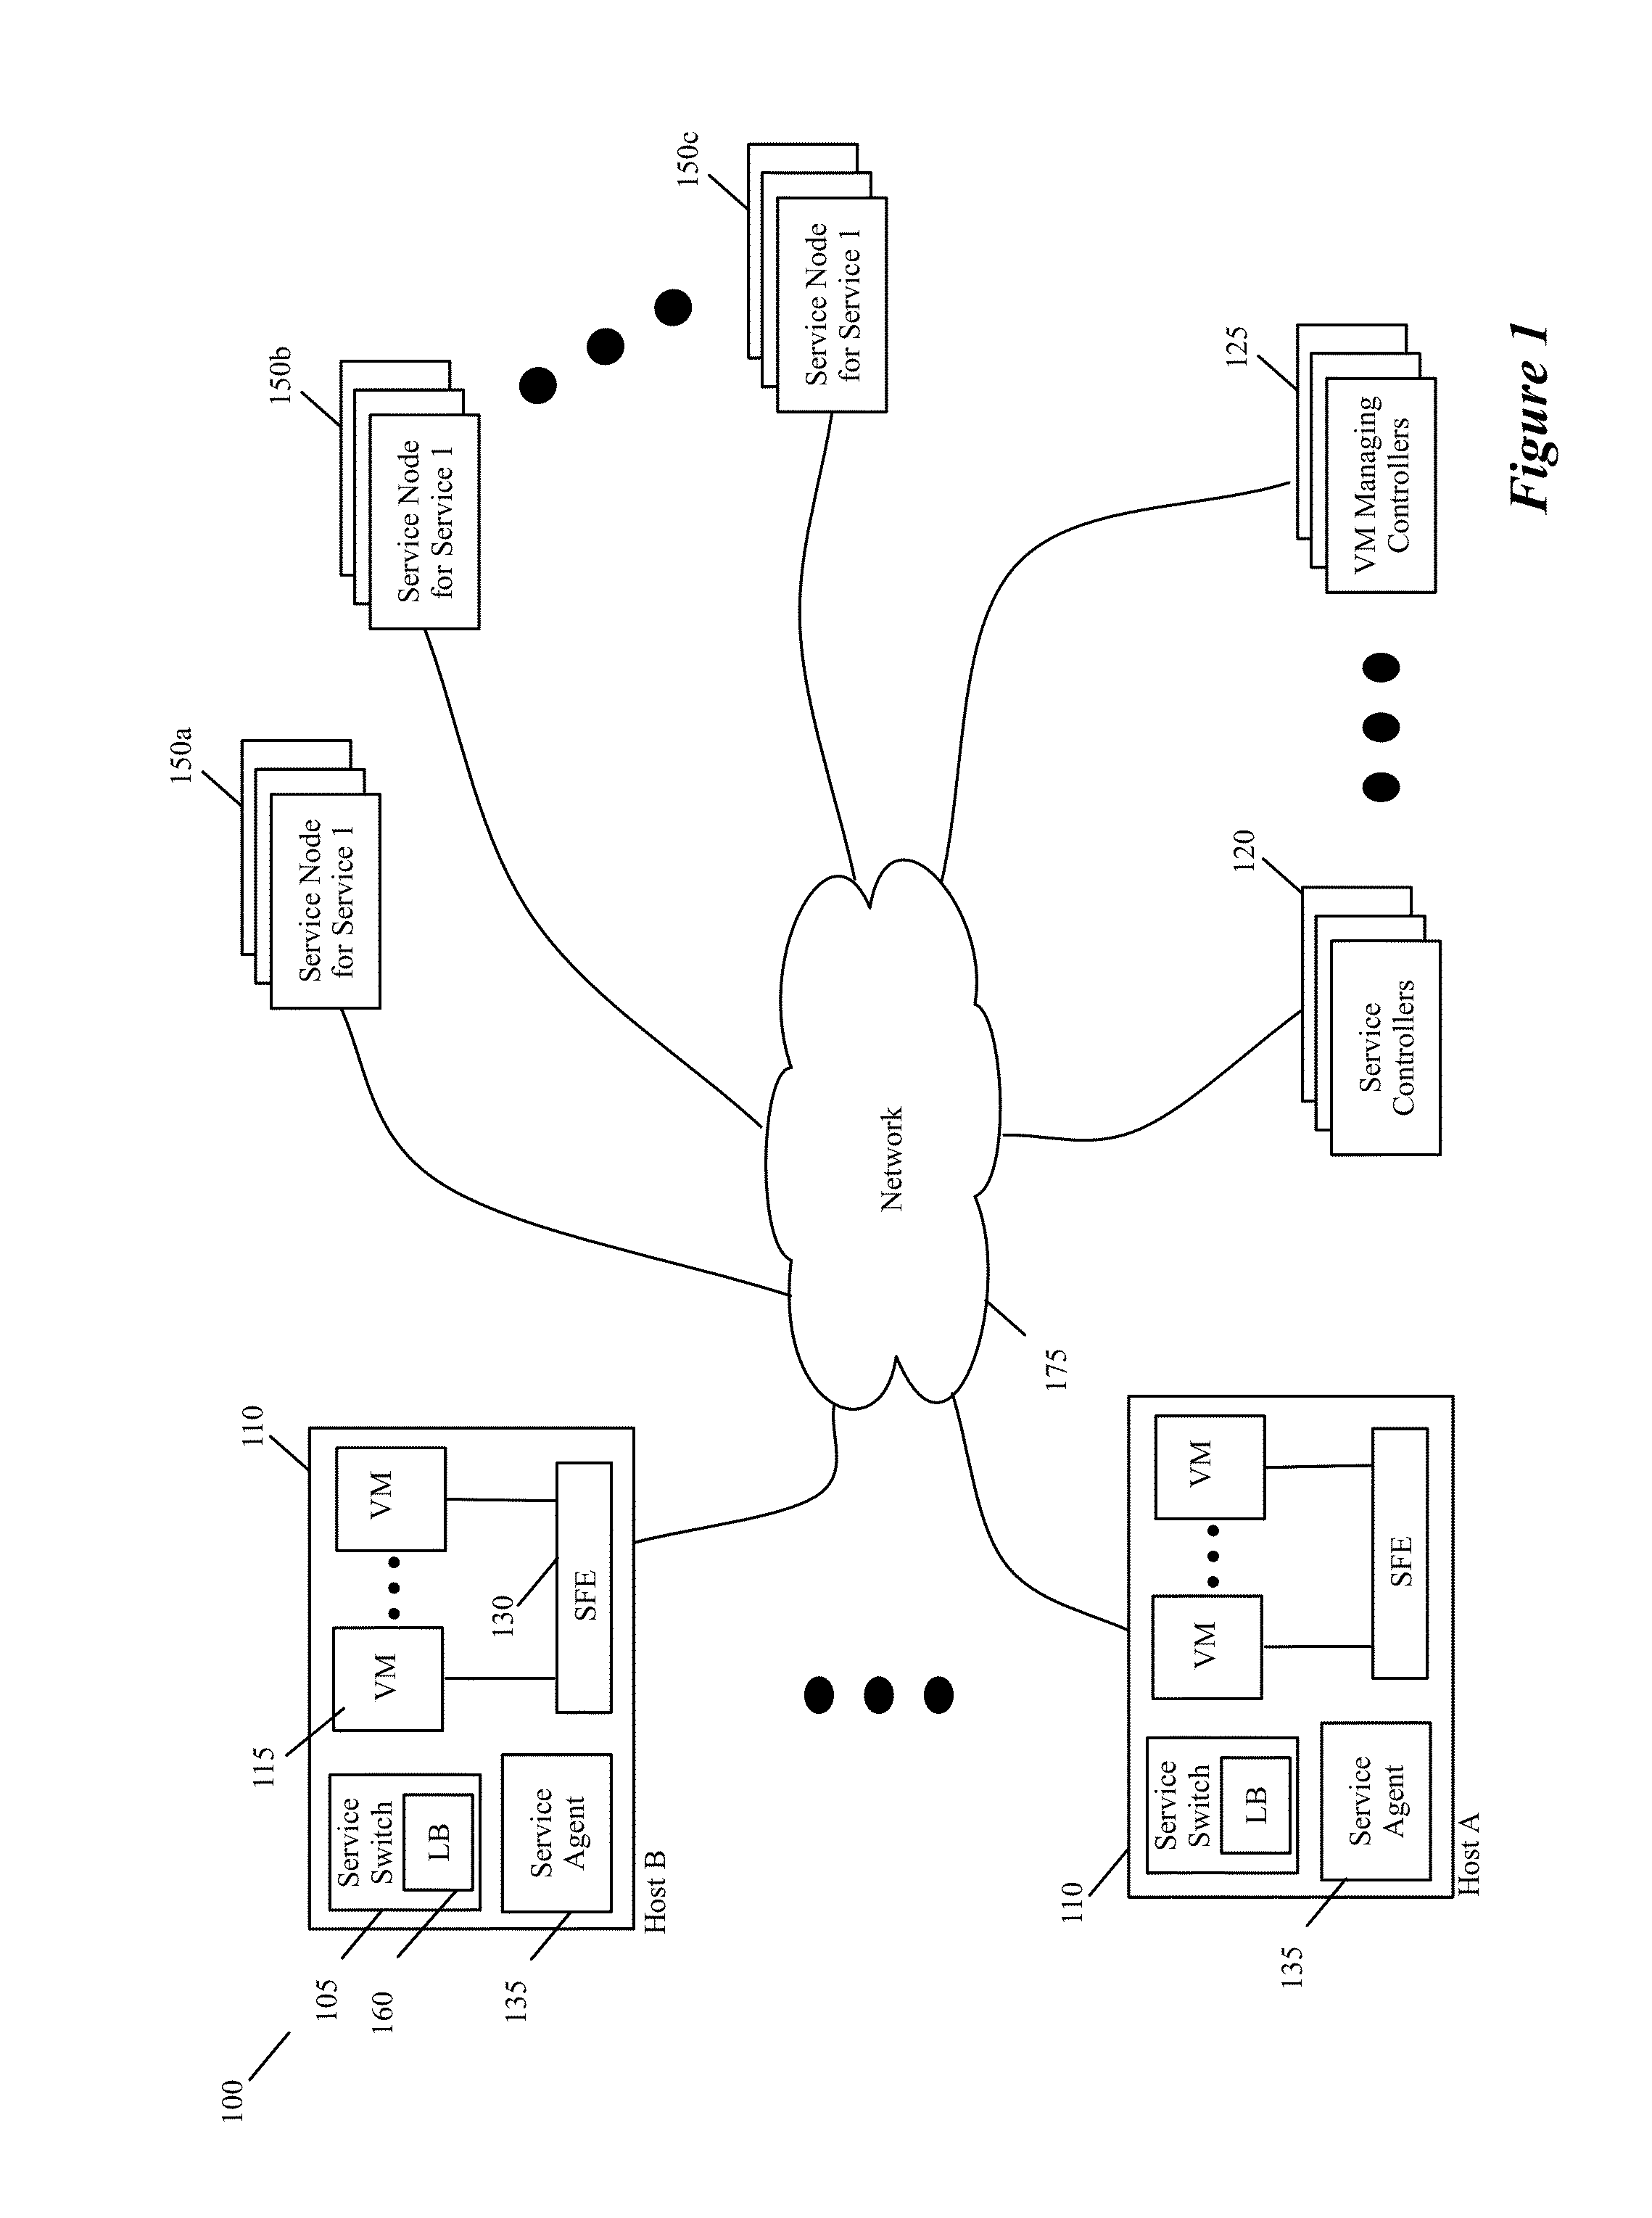 Controller Driven Reconfiguration of a Multi-Layered Application or Service Model